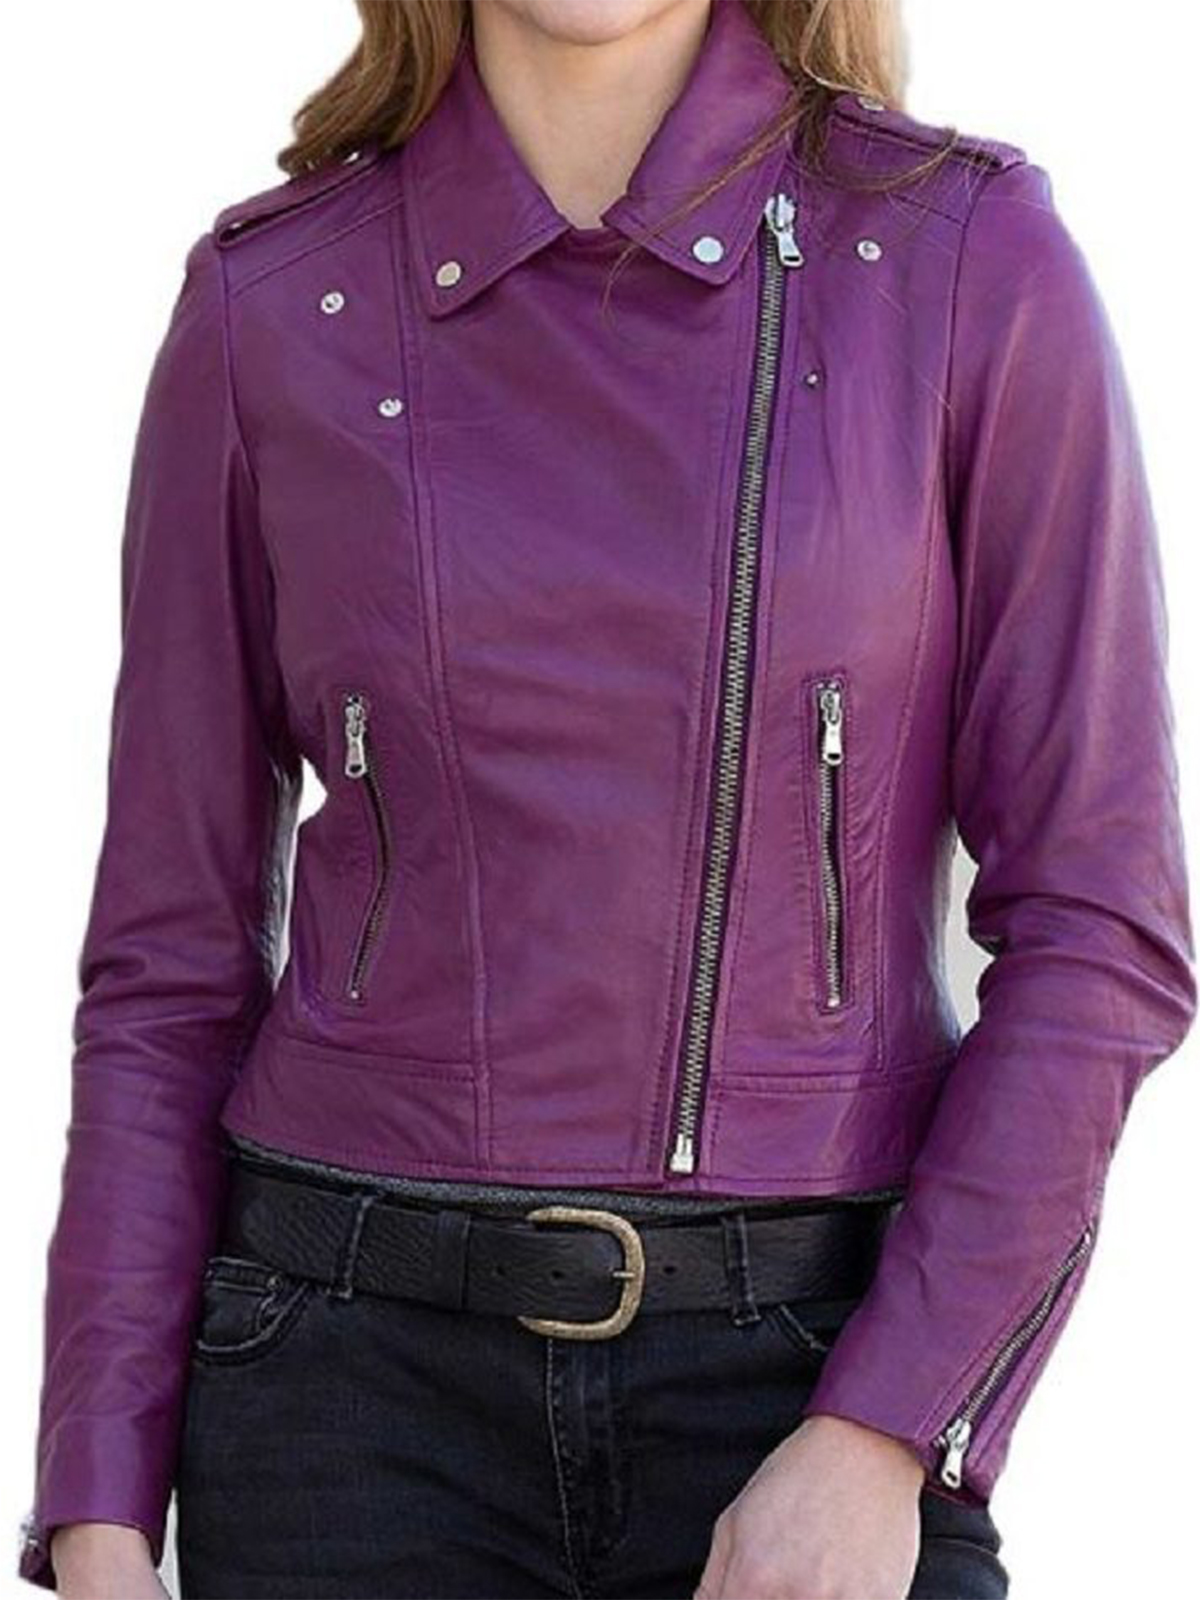 Womens Purple Classic Motorcycle Leather Jacket